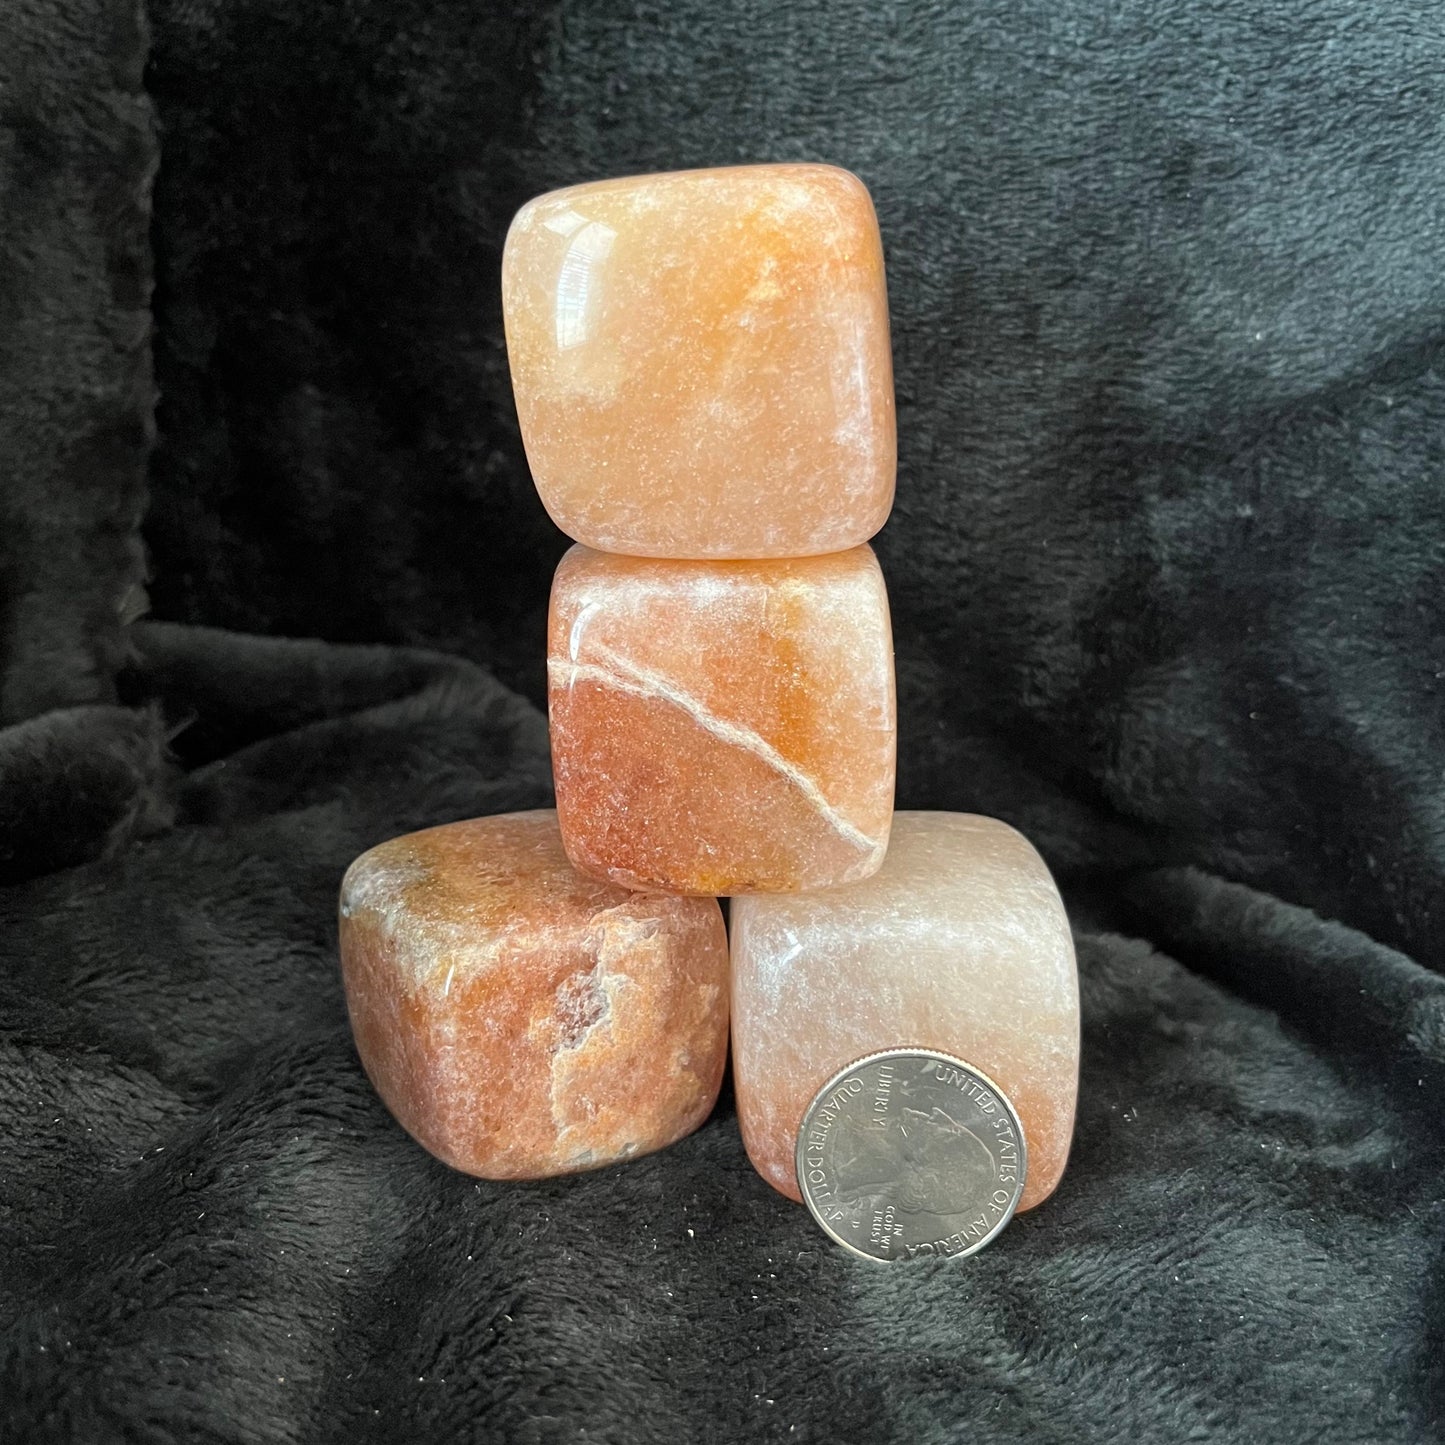 Red Aventurine Large Cube Tumbled Stone, 1 Pound Bag. WT-0117-A